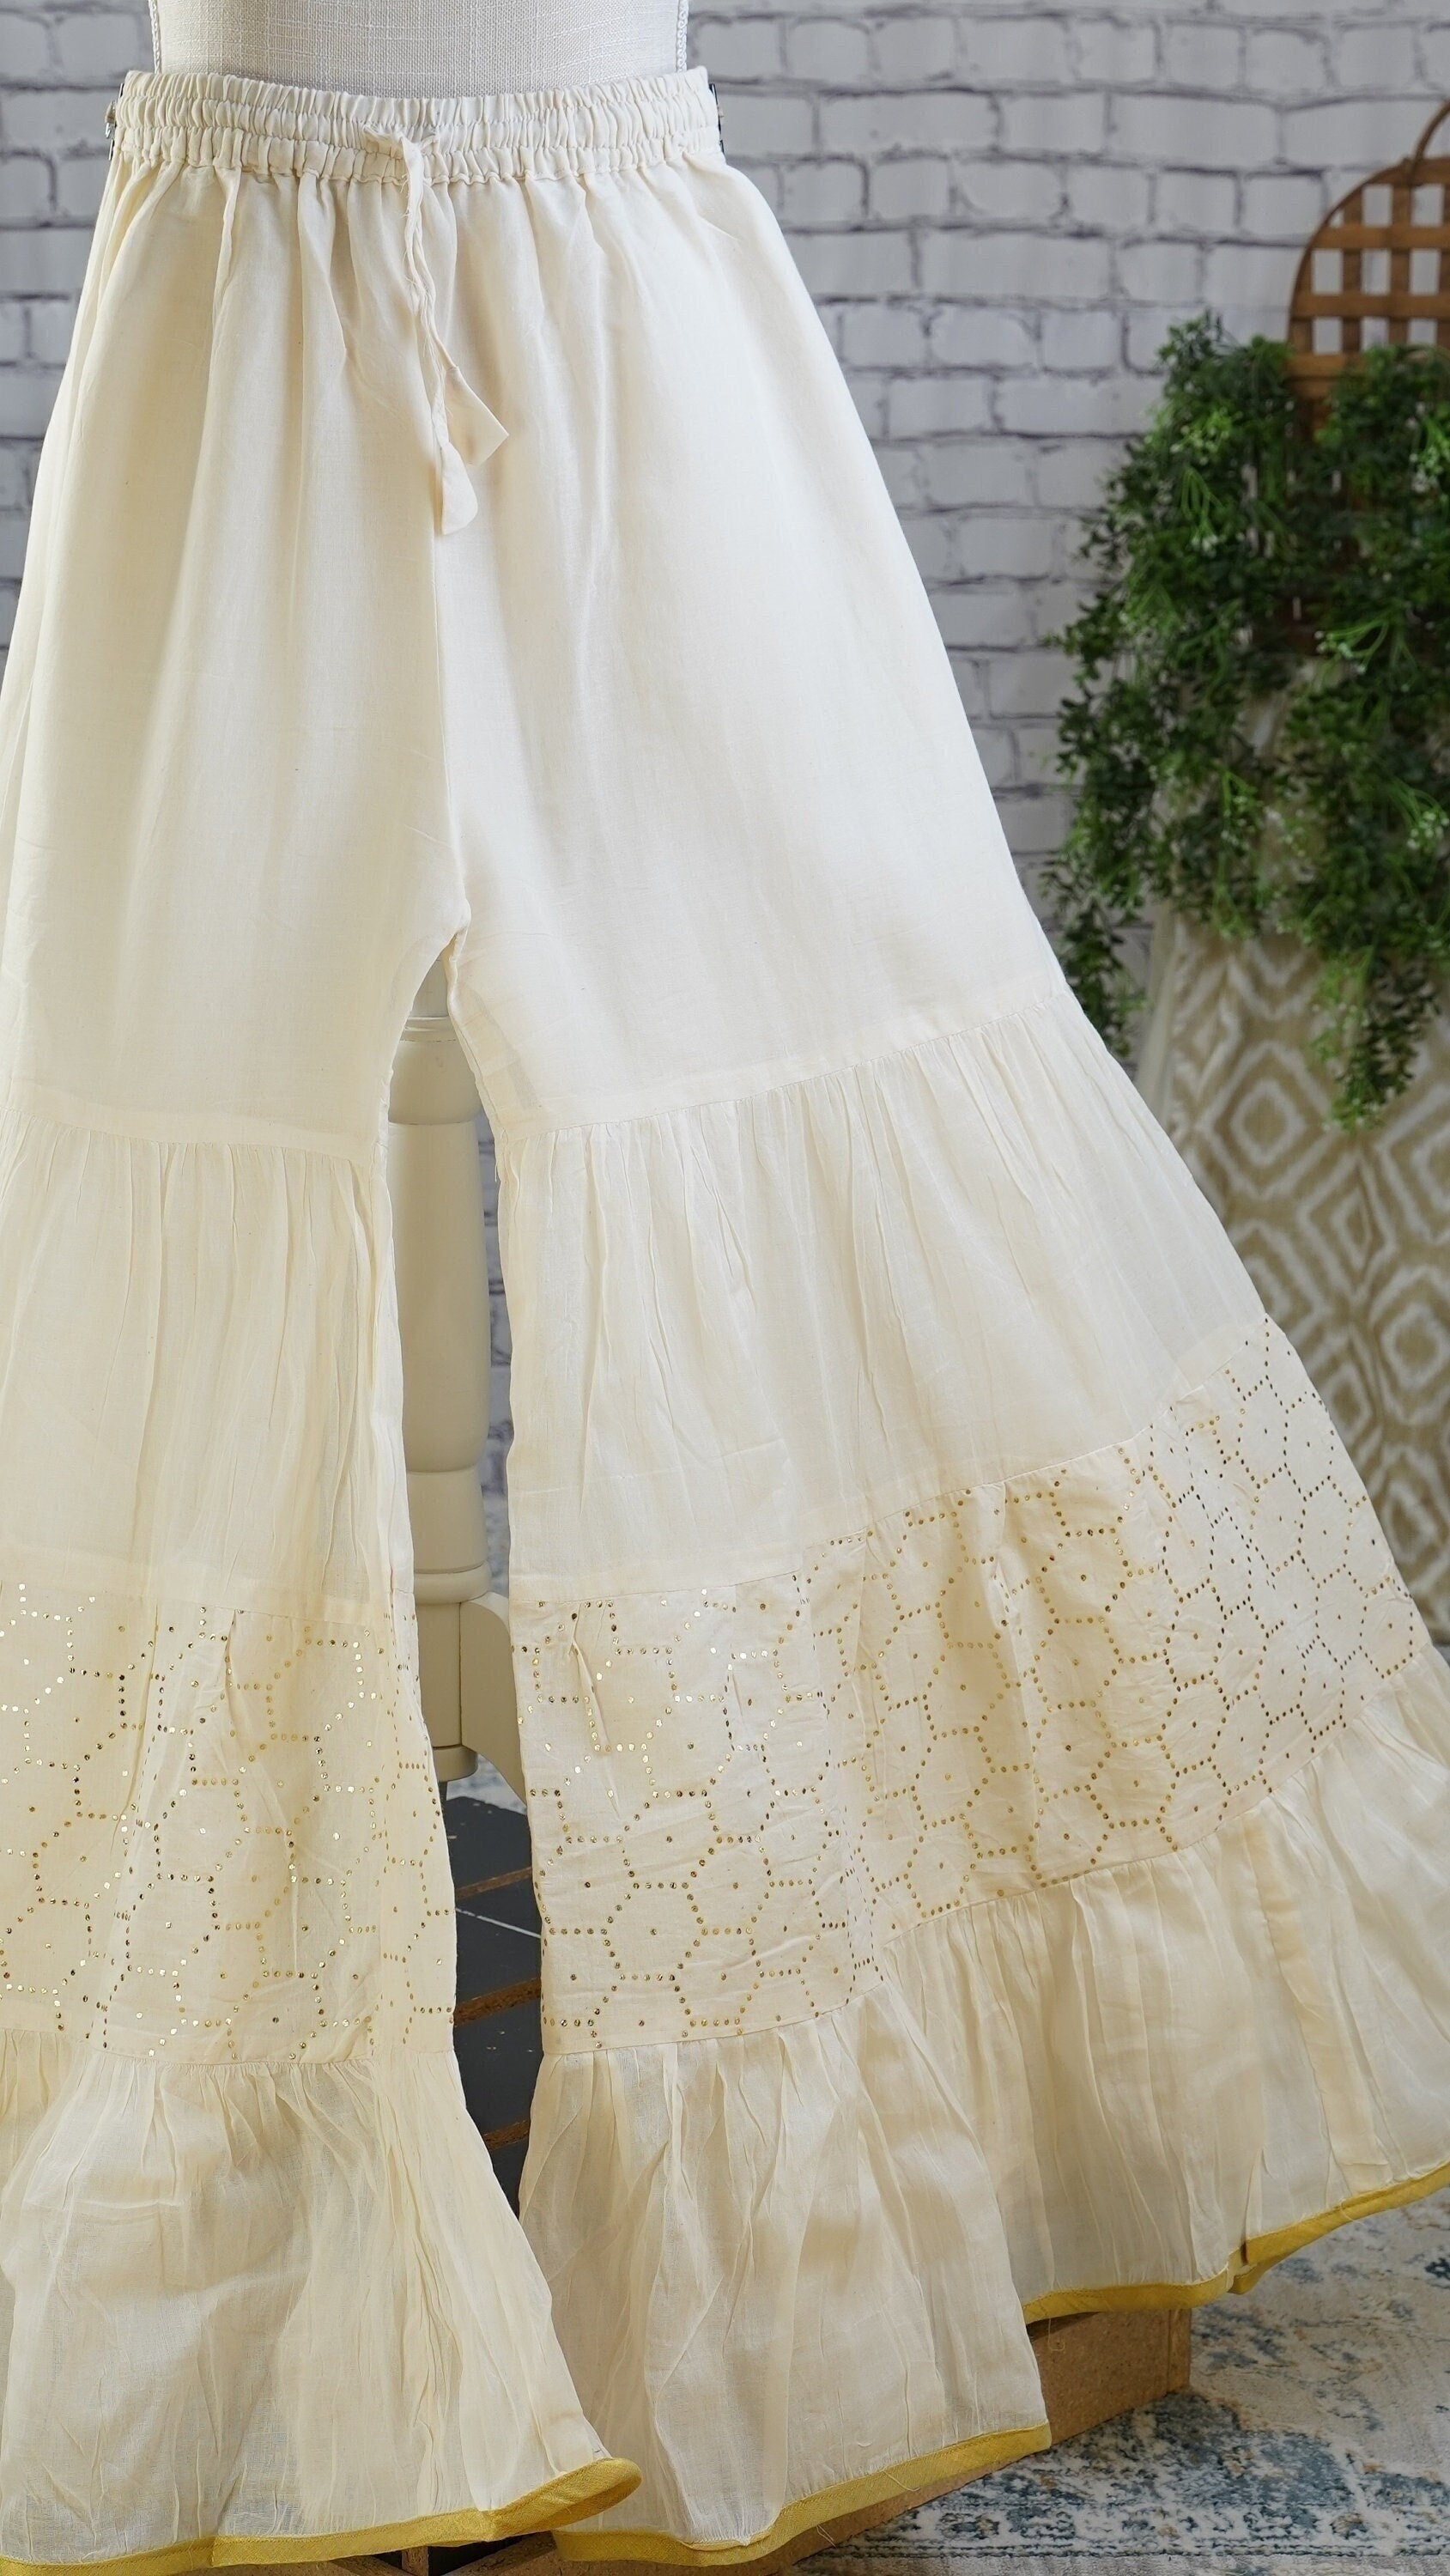 Fortunate Lace Pants in White, Sweet Lace Boho Palazzo Pants from Spool 72.  | Spool No.72